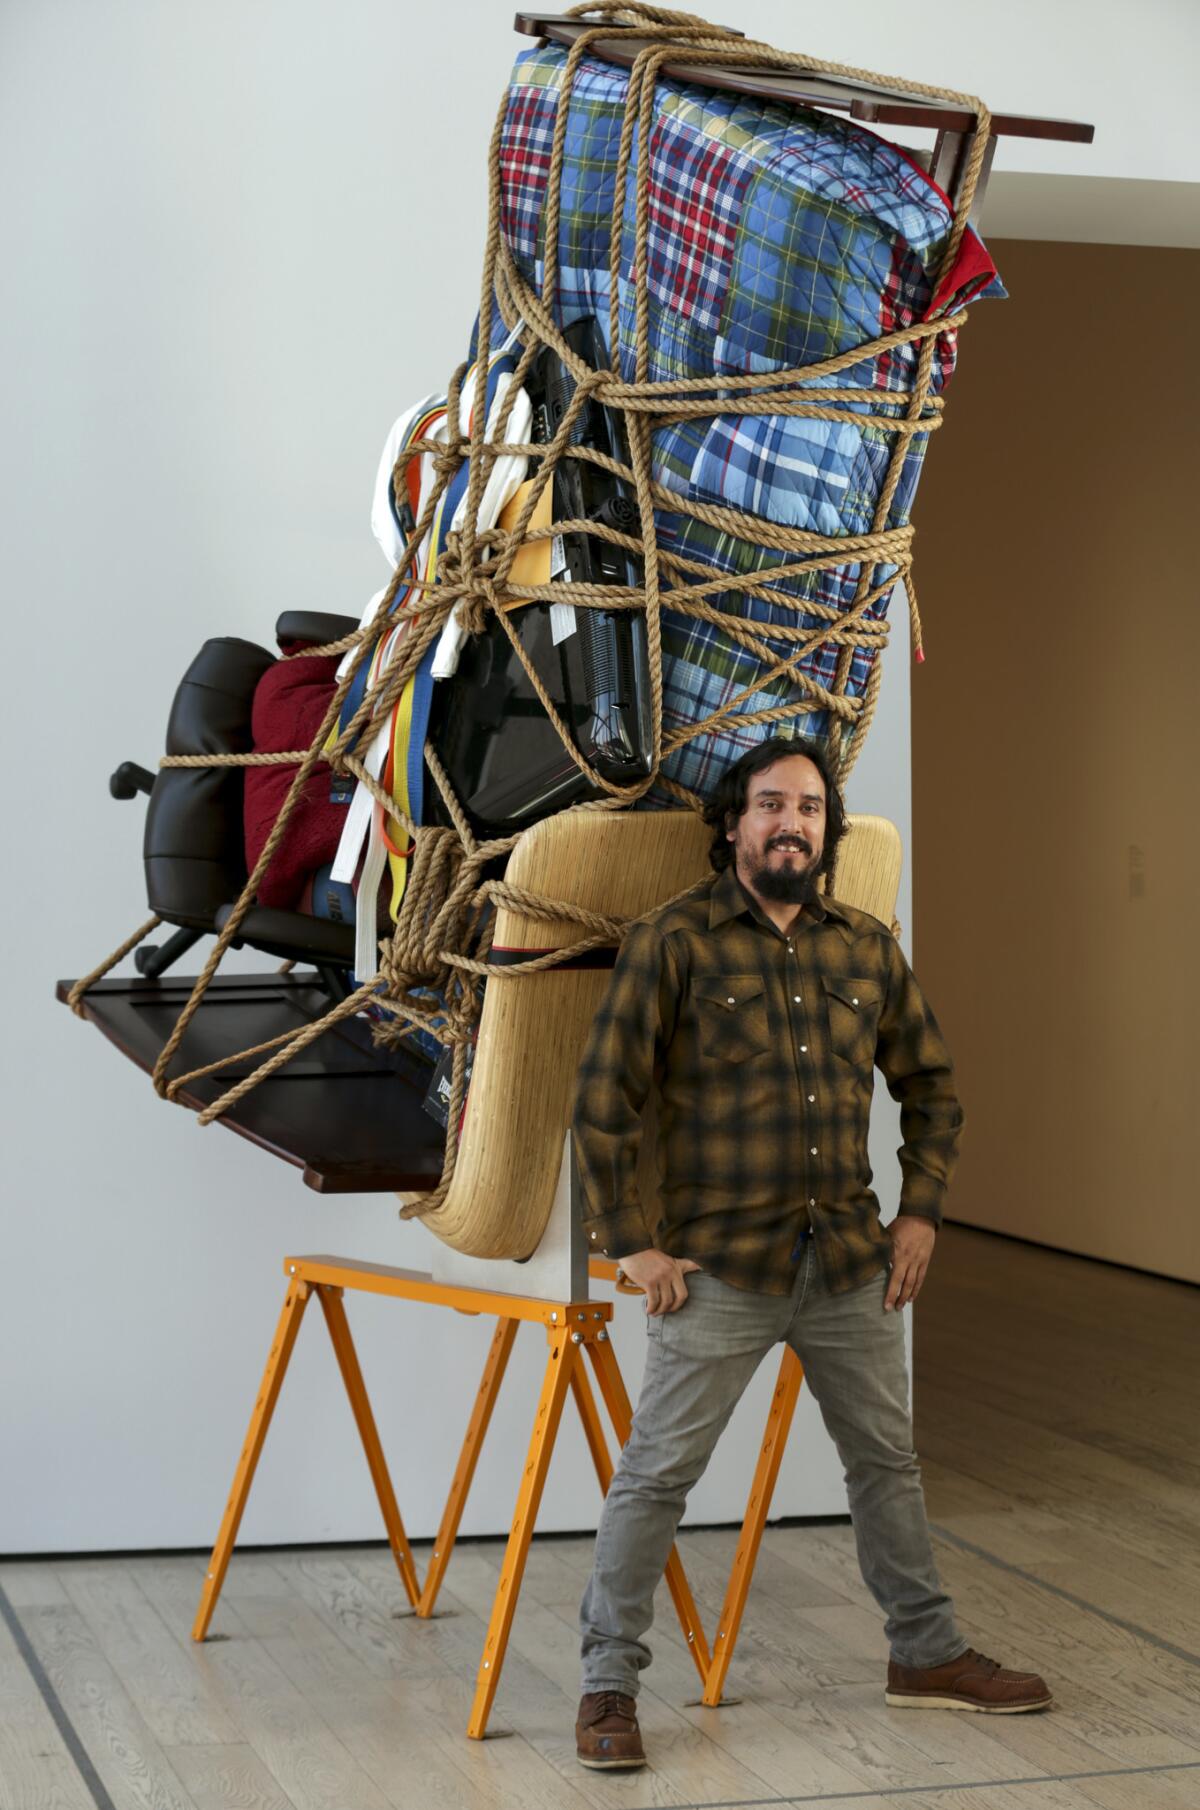 Artist Camilo Ontiveros stands before "Temporary Storage: The Belongings of Juan Manuel Montes" at LACMA. (Irfan Khan / Los Angeles Times)